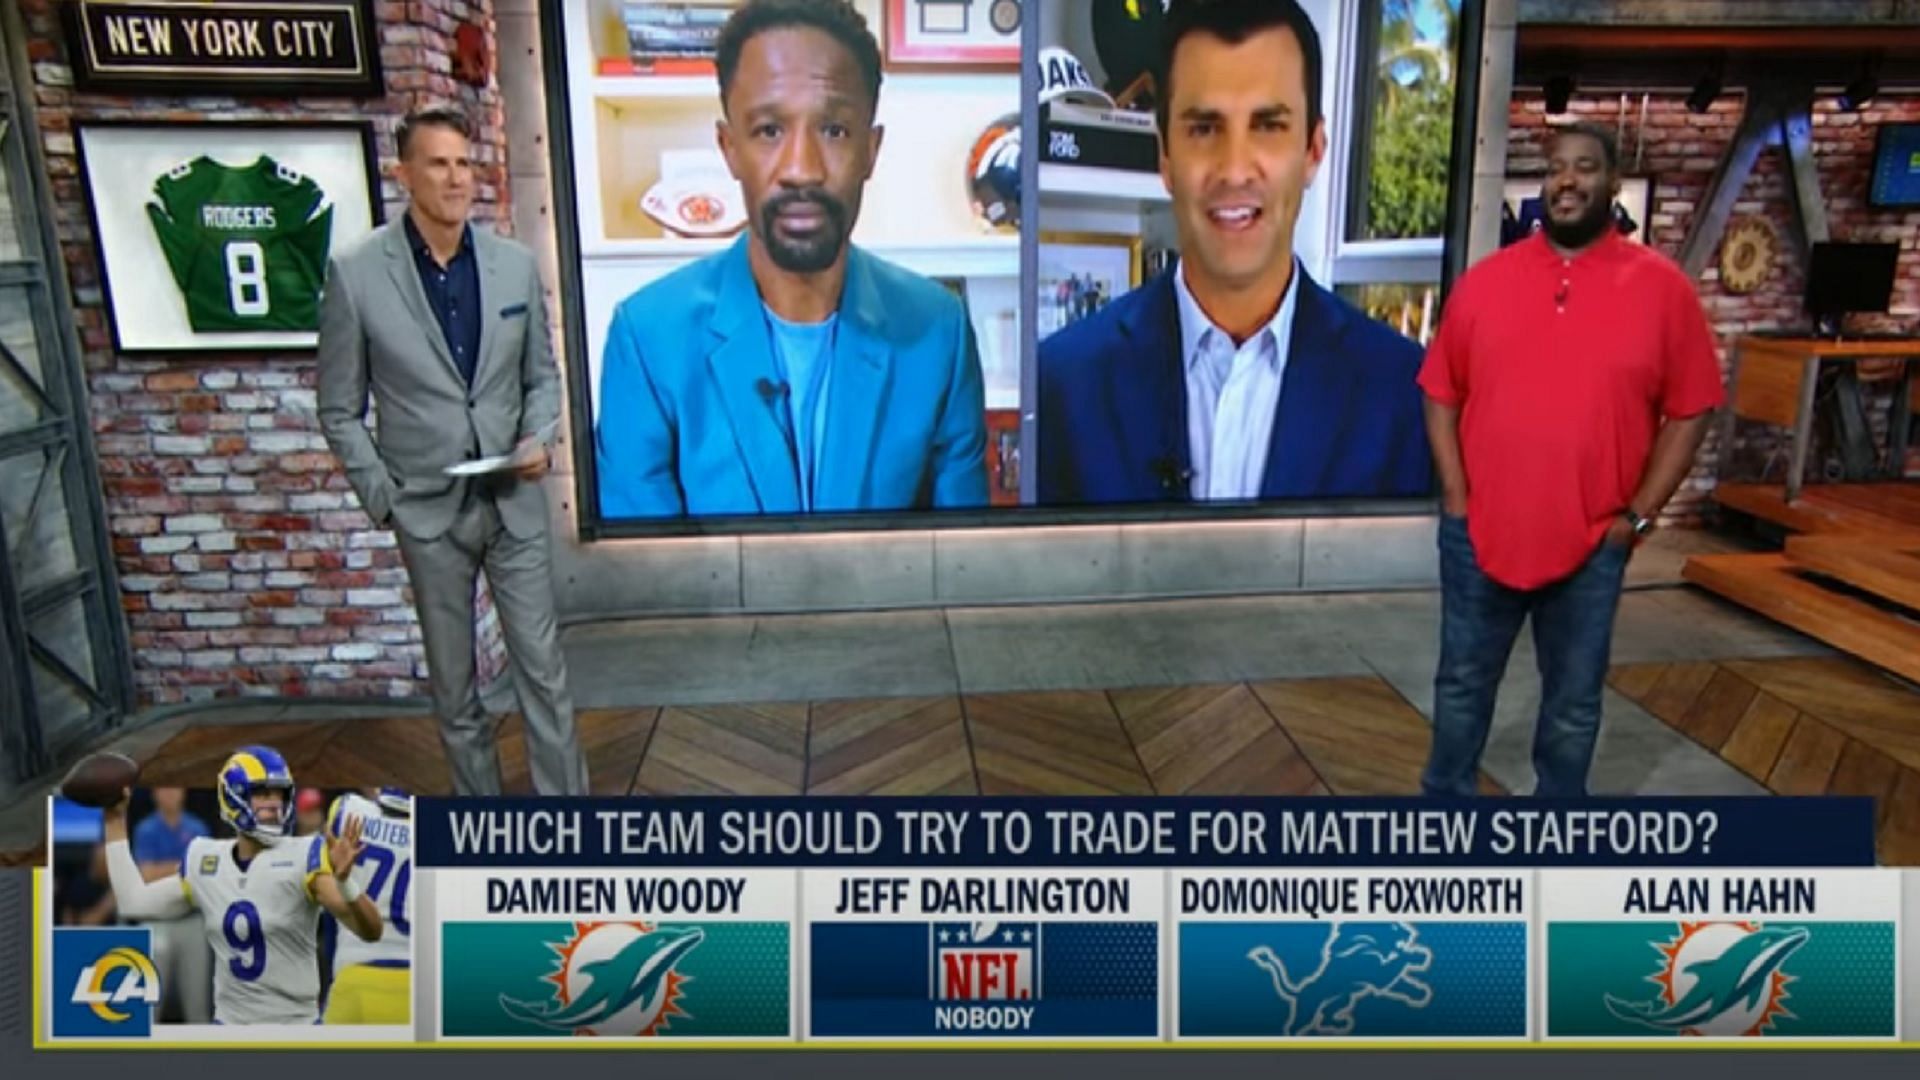 NFL analysts call for Rams QB to join Miami Dolphins - Courtesy of Get Up on YouTube